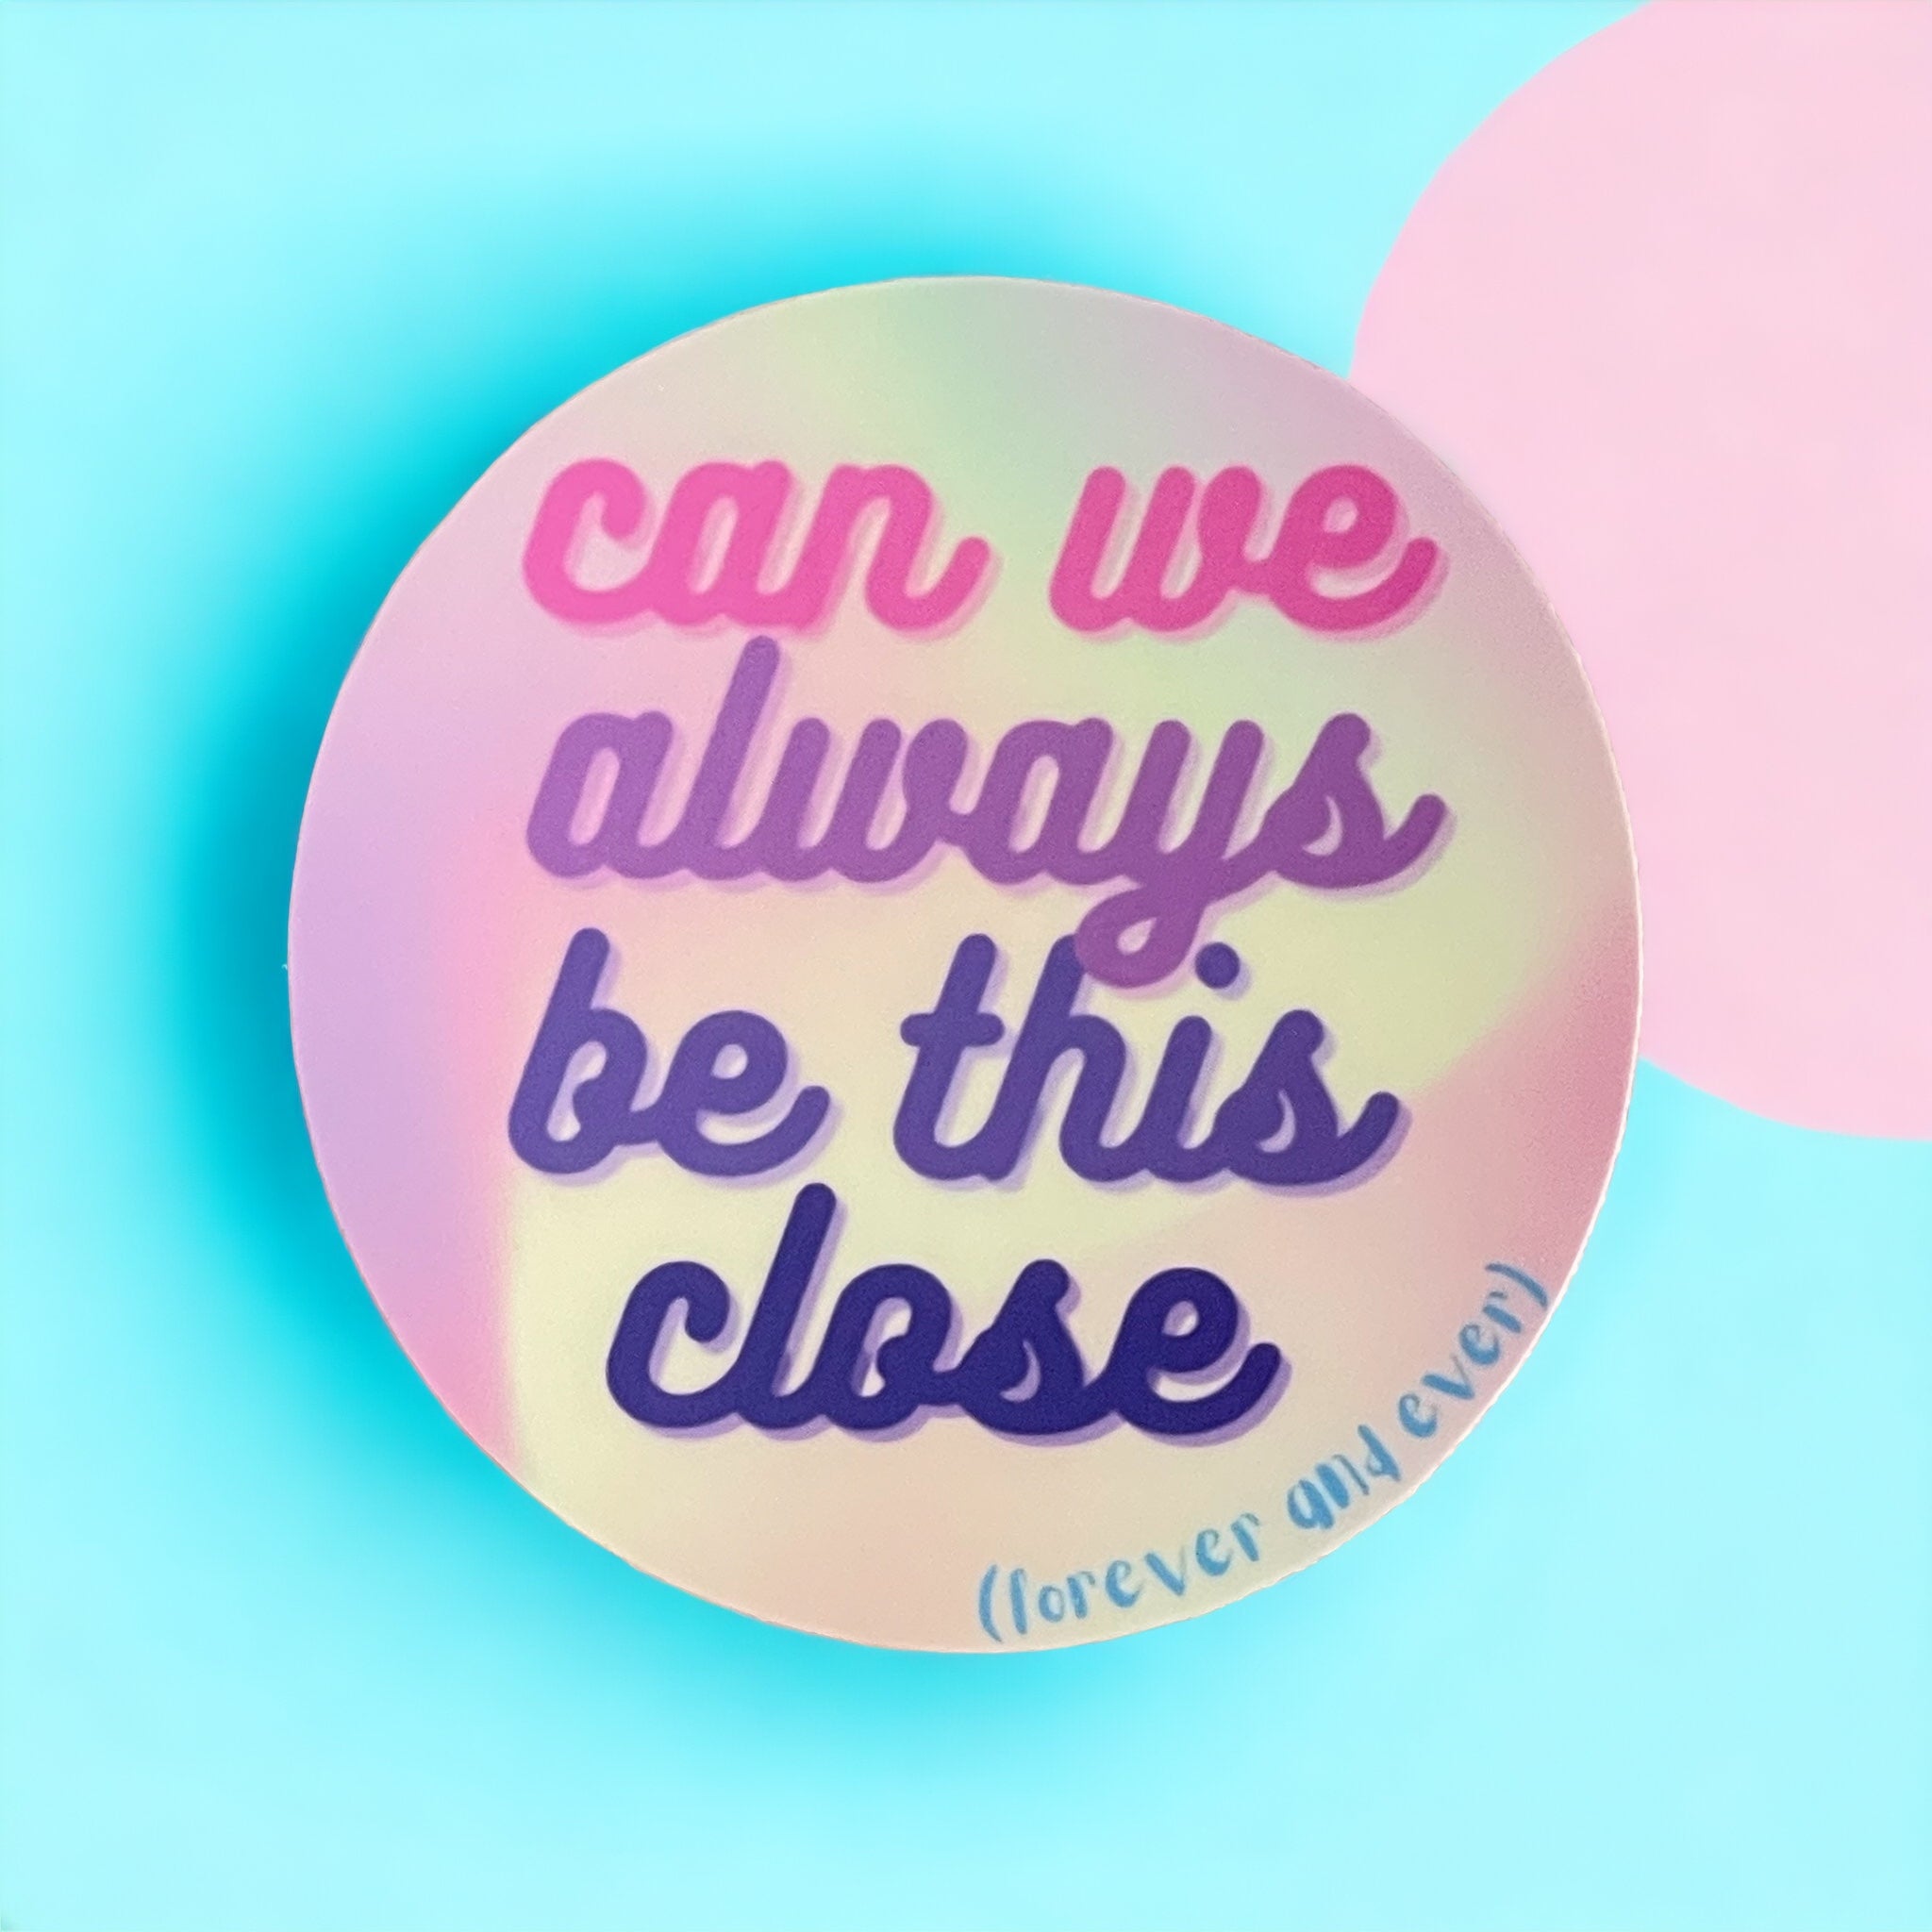 Vinyl Sticker - Can We Always Be This Close